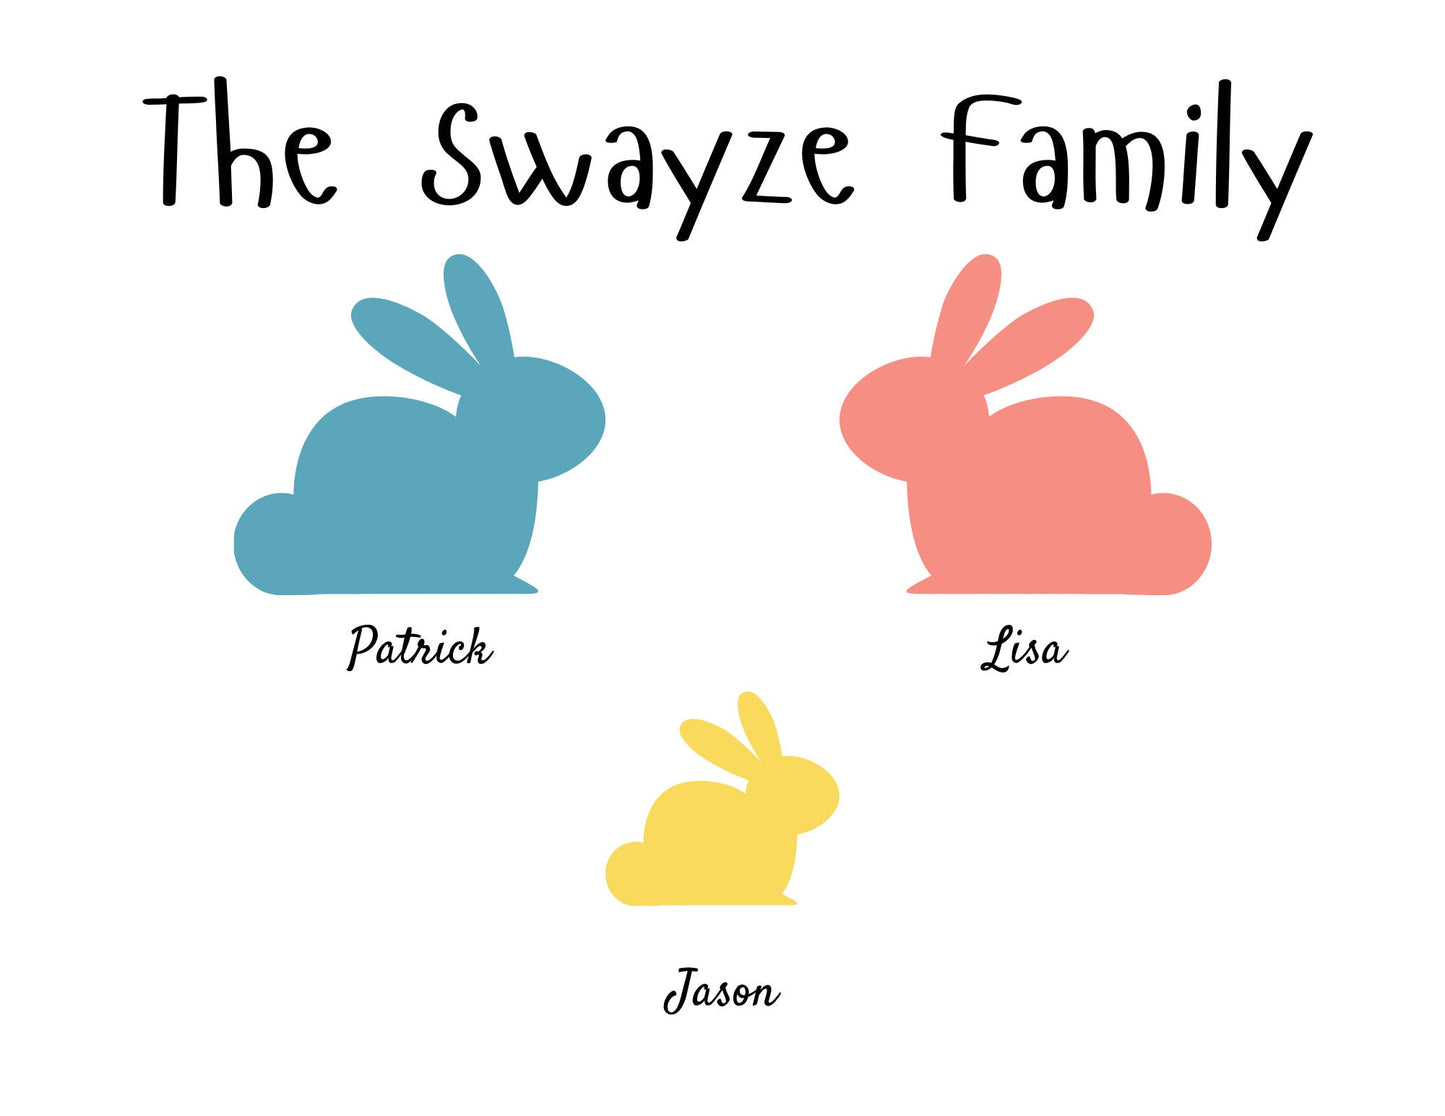 Easter Greeting Cards Family Name